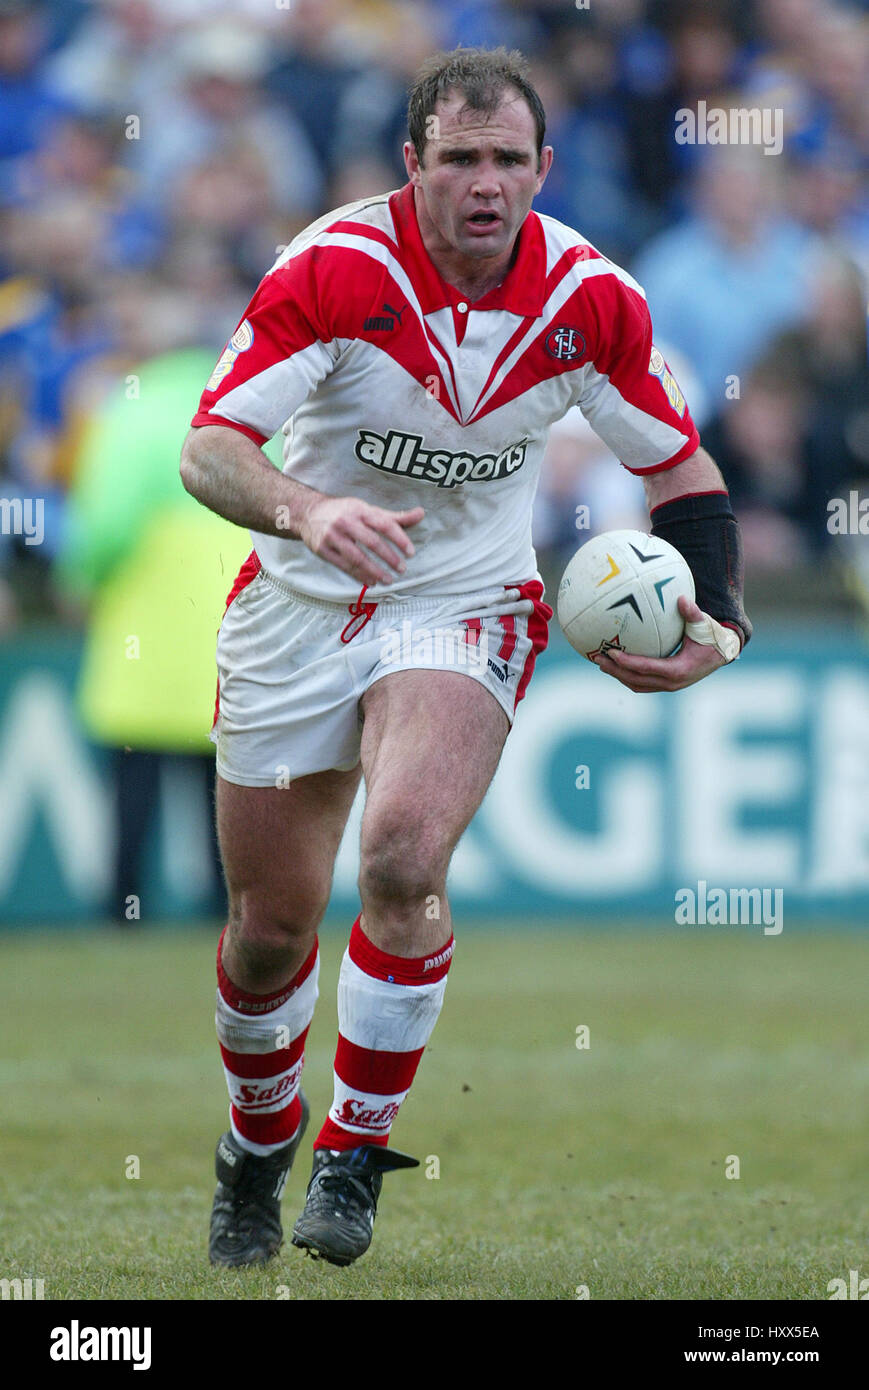 CHRIS JOYNT ST. HELENS RLFC KNOWSLEY ROAD ST.HELENS 13 March 2004 Stock Photo